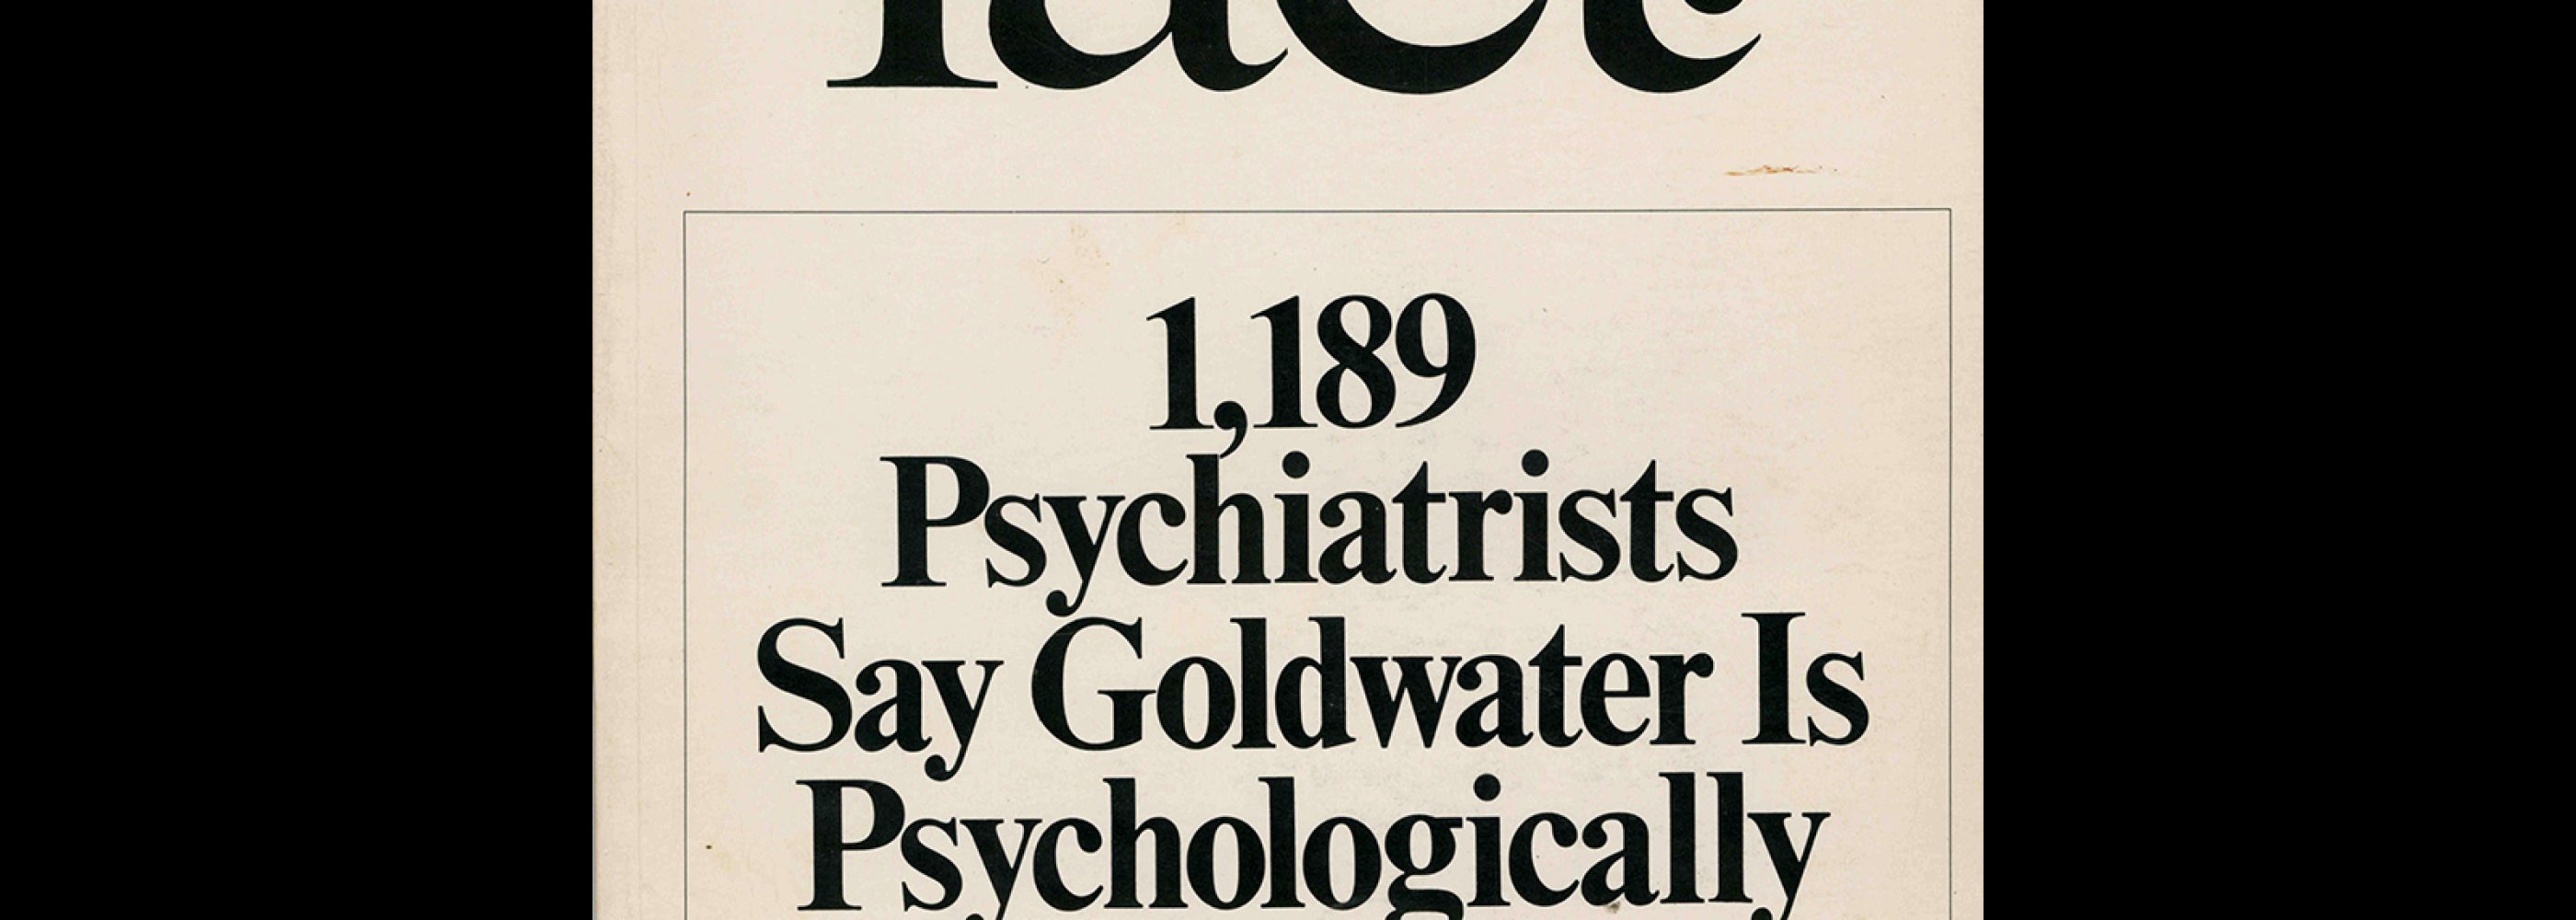 Fact, Volume One, Issue Five, 1964. Designed by Herb Lubalin